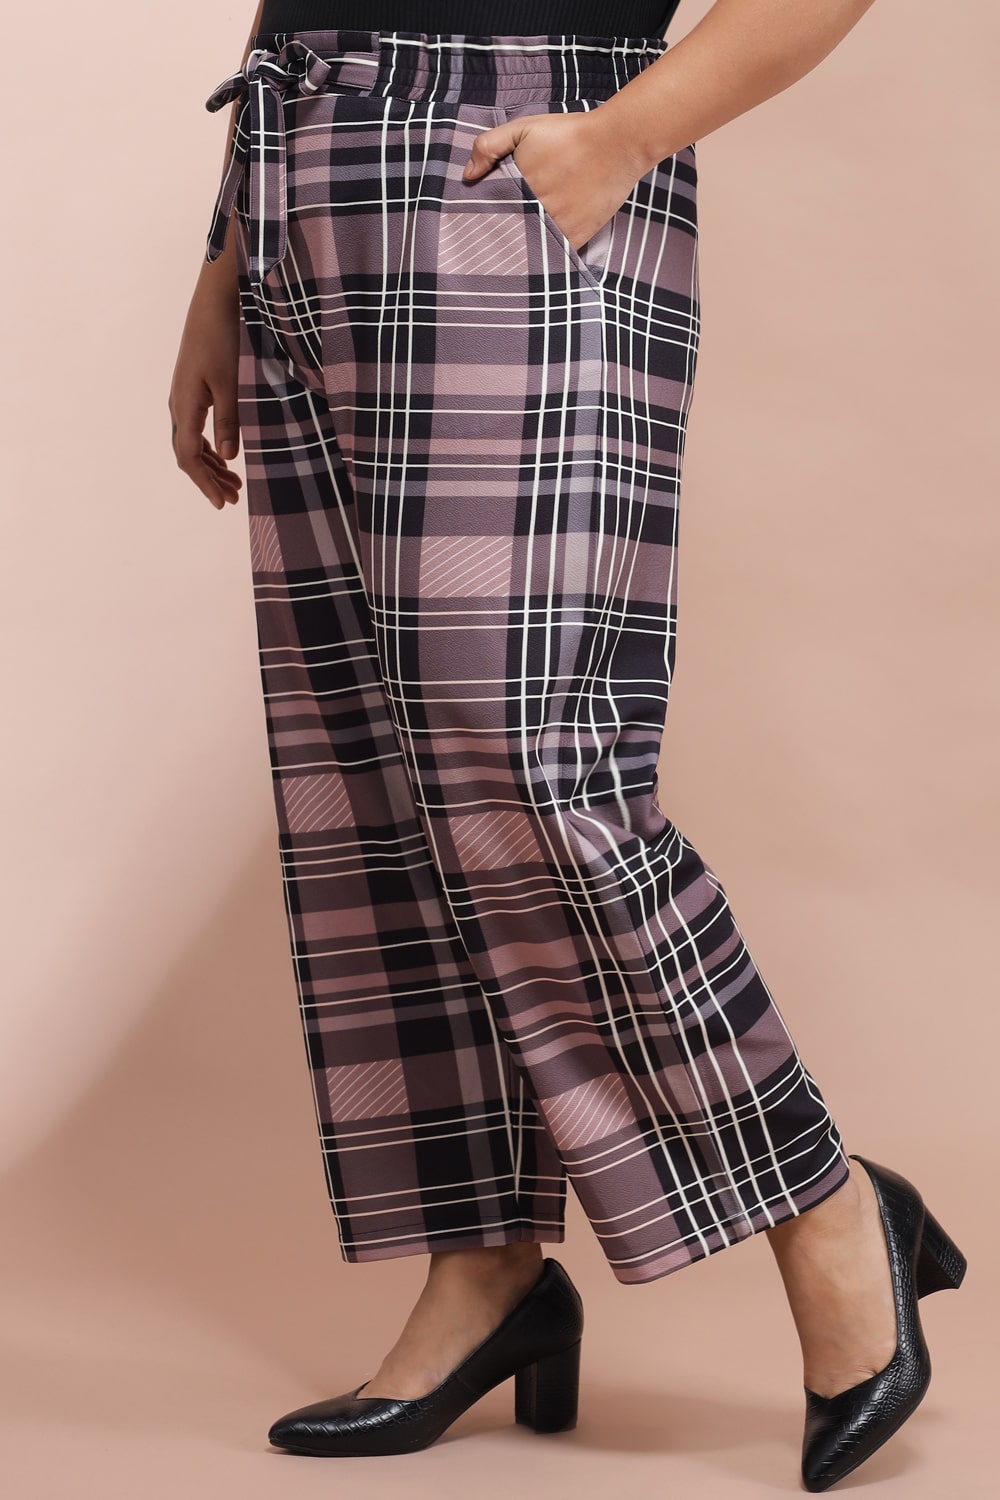 Plus Size Dusty Pink Black Checkered Pants